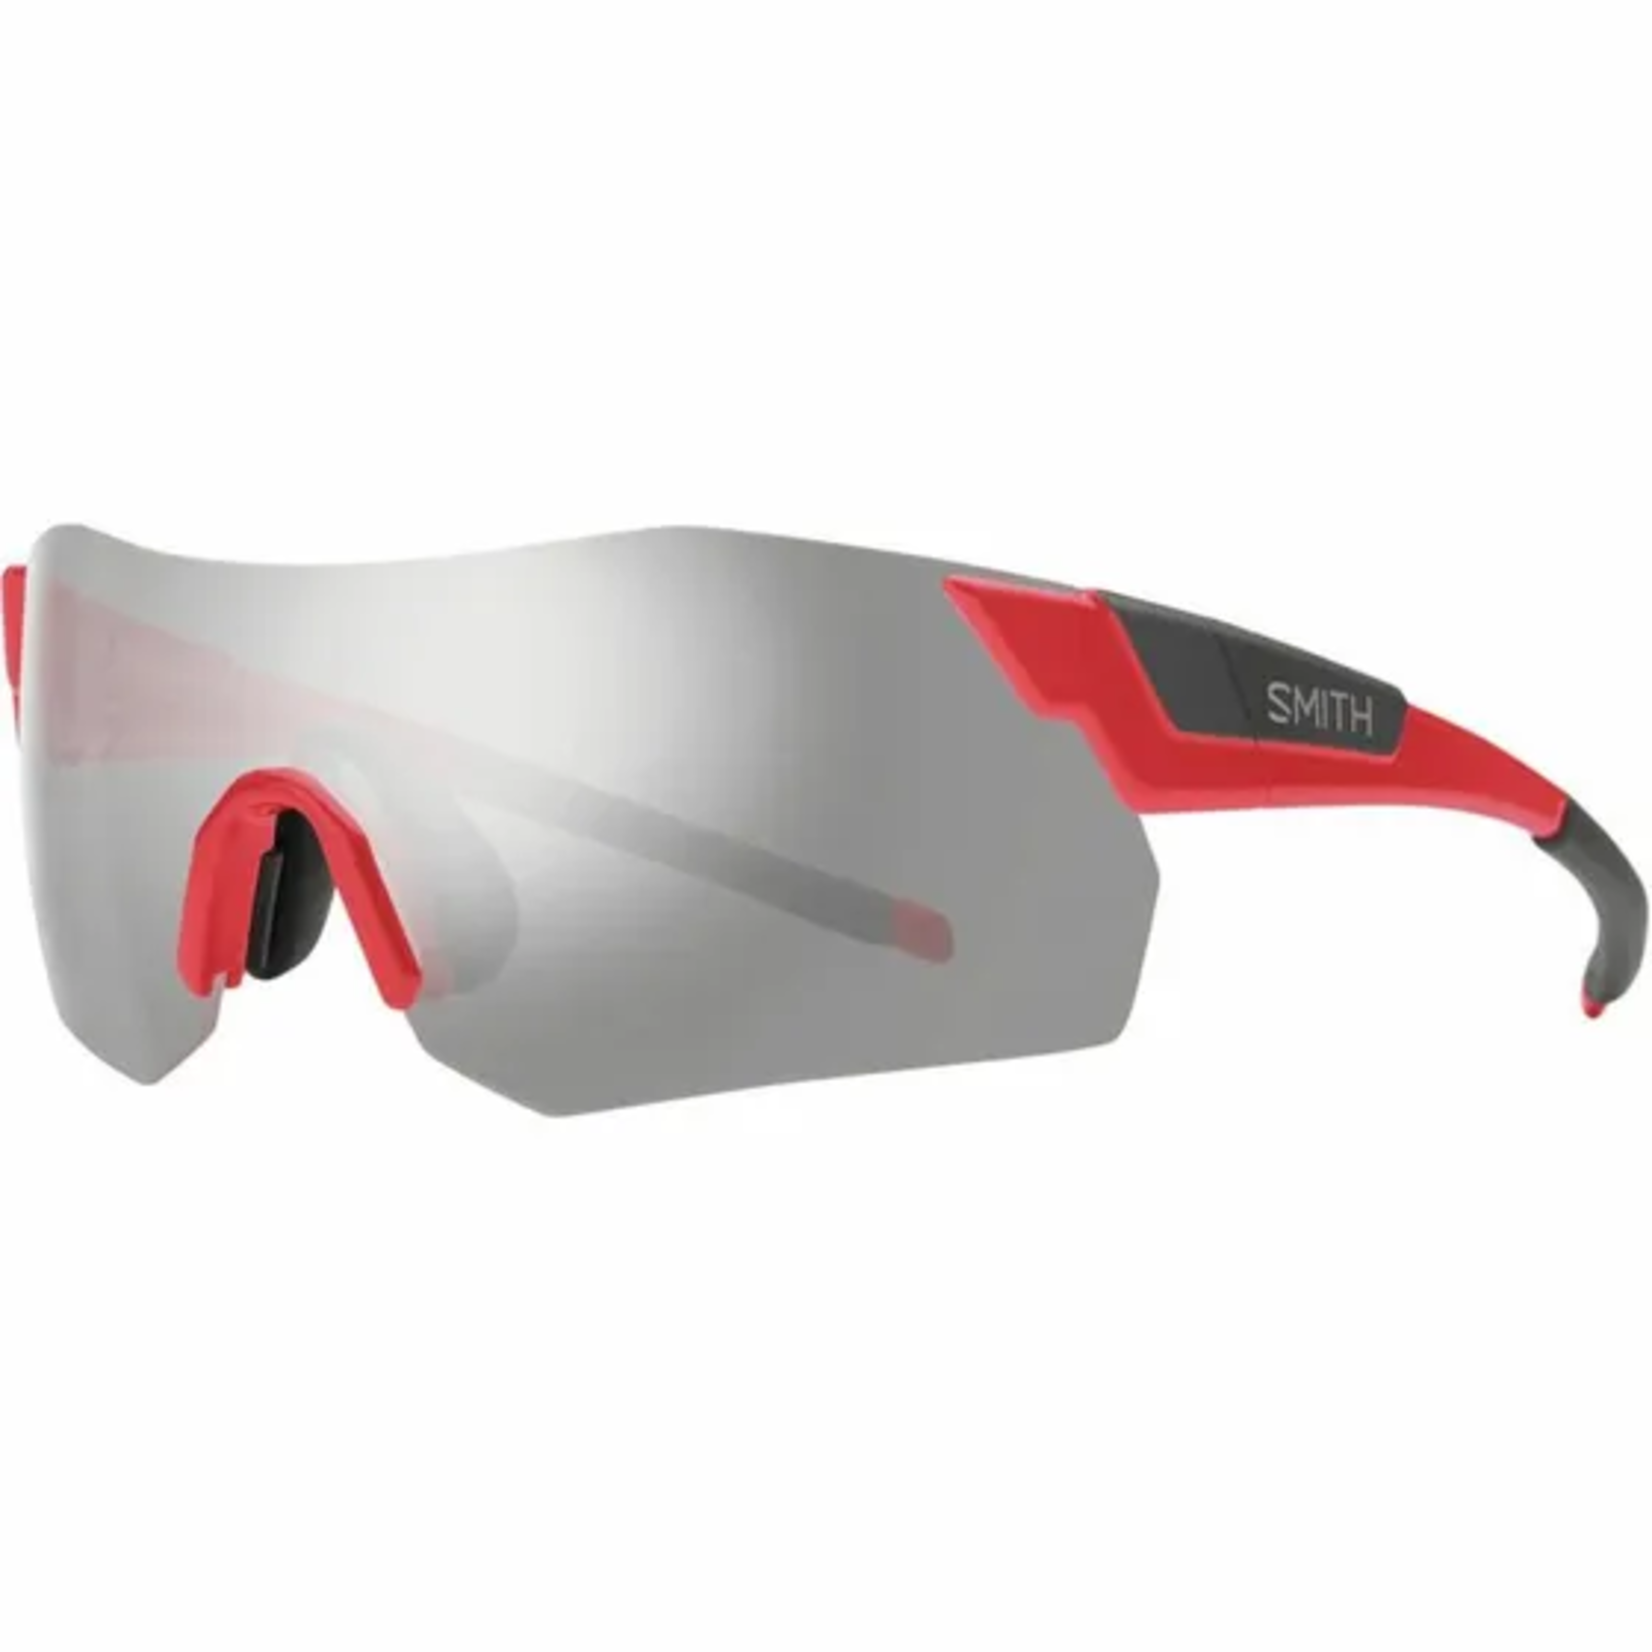 SMITH SMITH Pivlock Arena Max lunettes Rouge/Gris